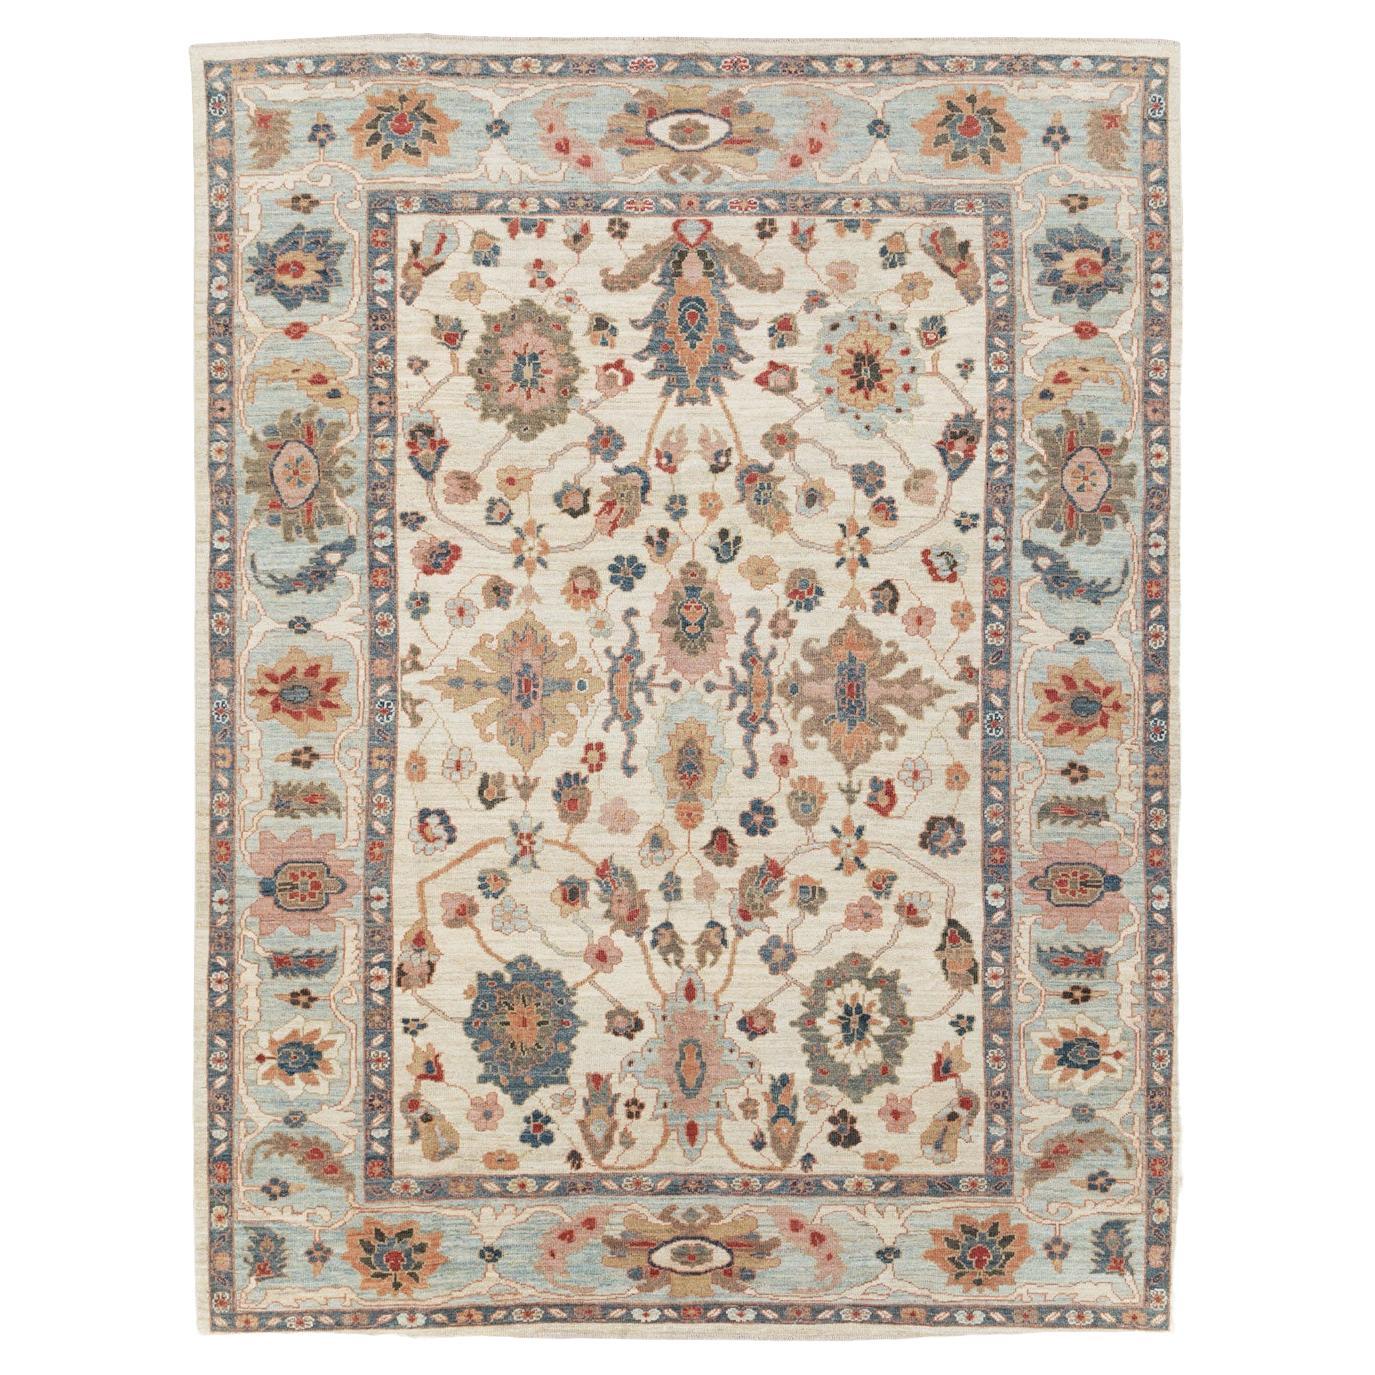 Contemporary Handmade Persian Sultanabad Small Room Size Carpet